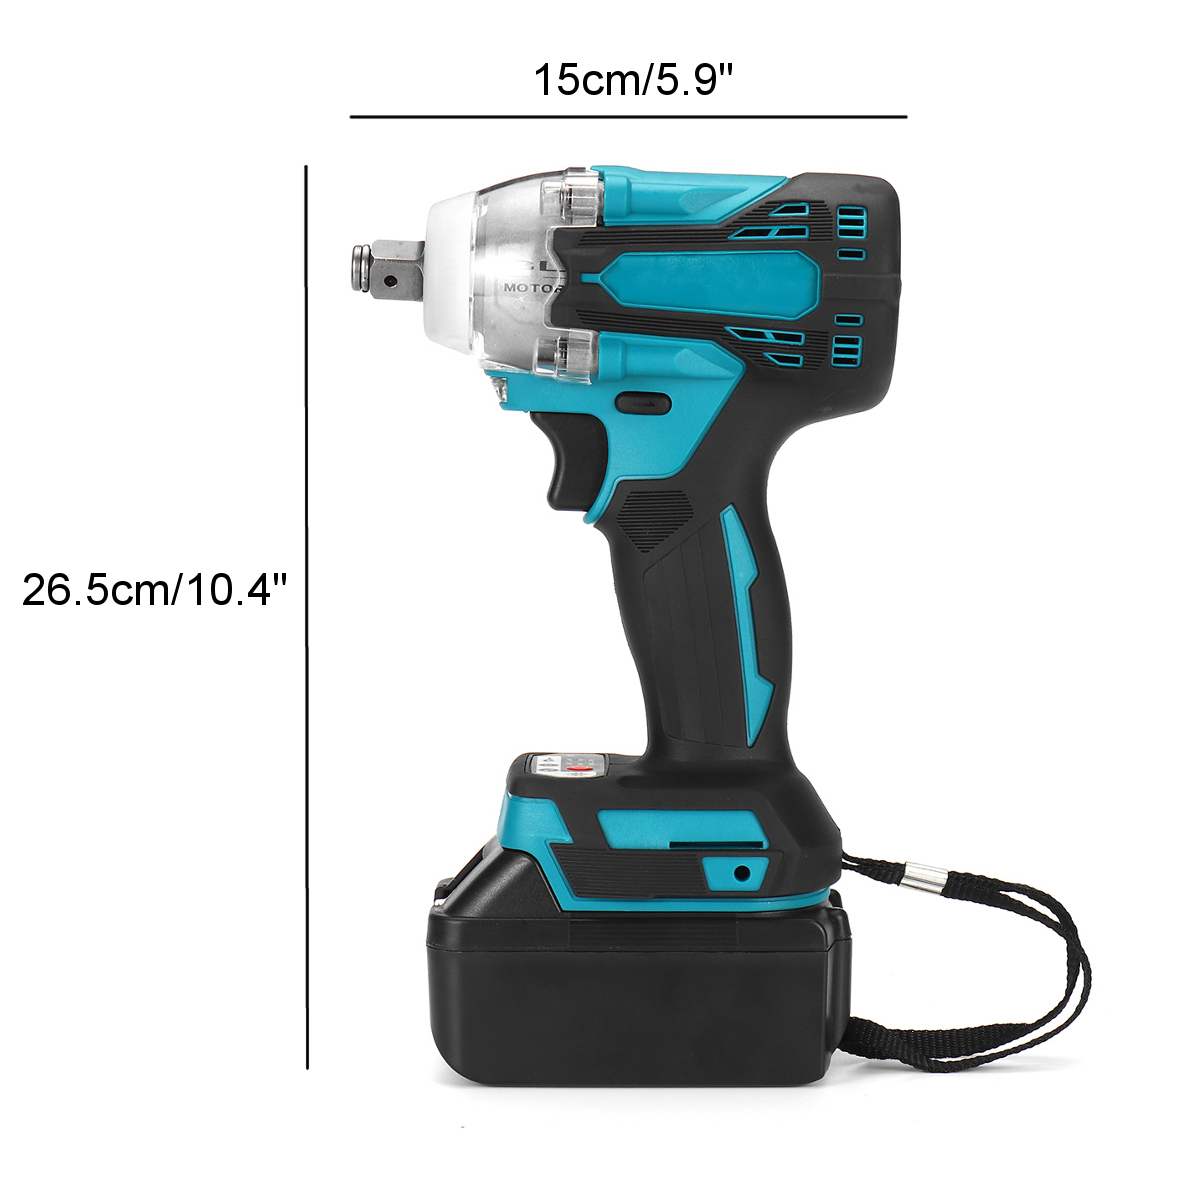 Drillpro-2-in1-18V-800Nm-Electric-Wrench-Screwdriver-Brushless-Cordless-Electric-12Wrench-14Screwdri-1806148-14